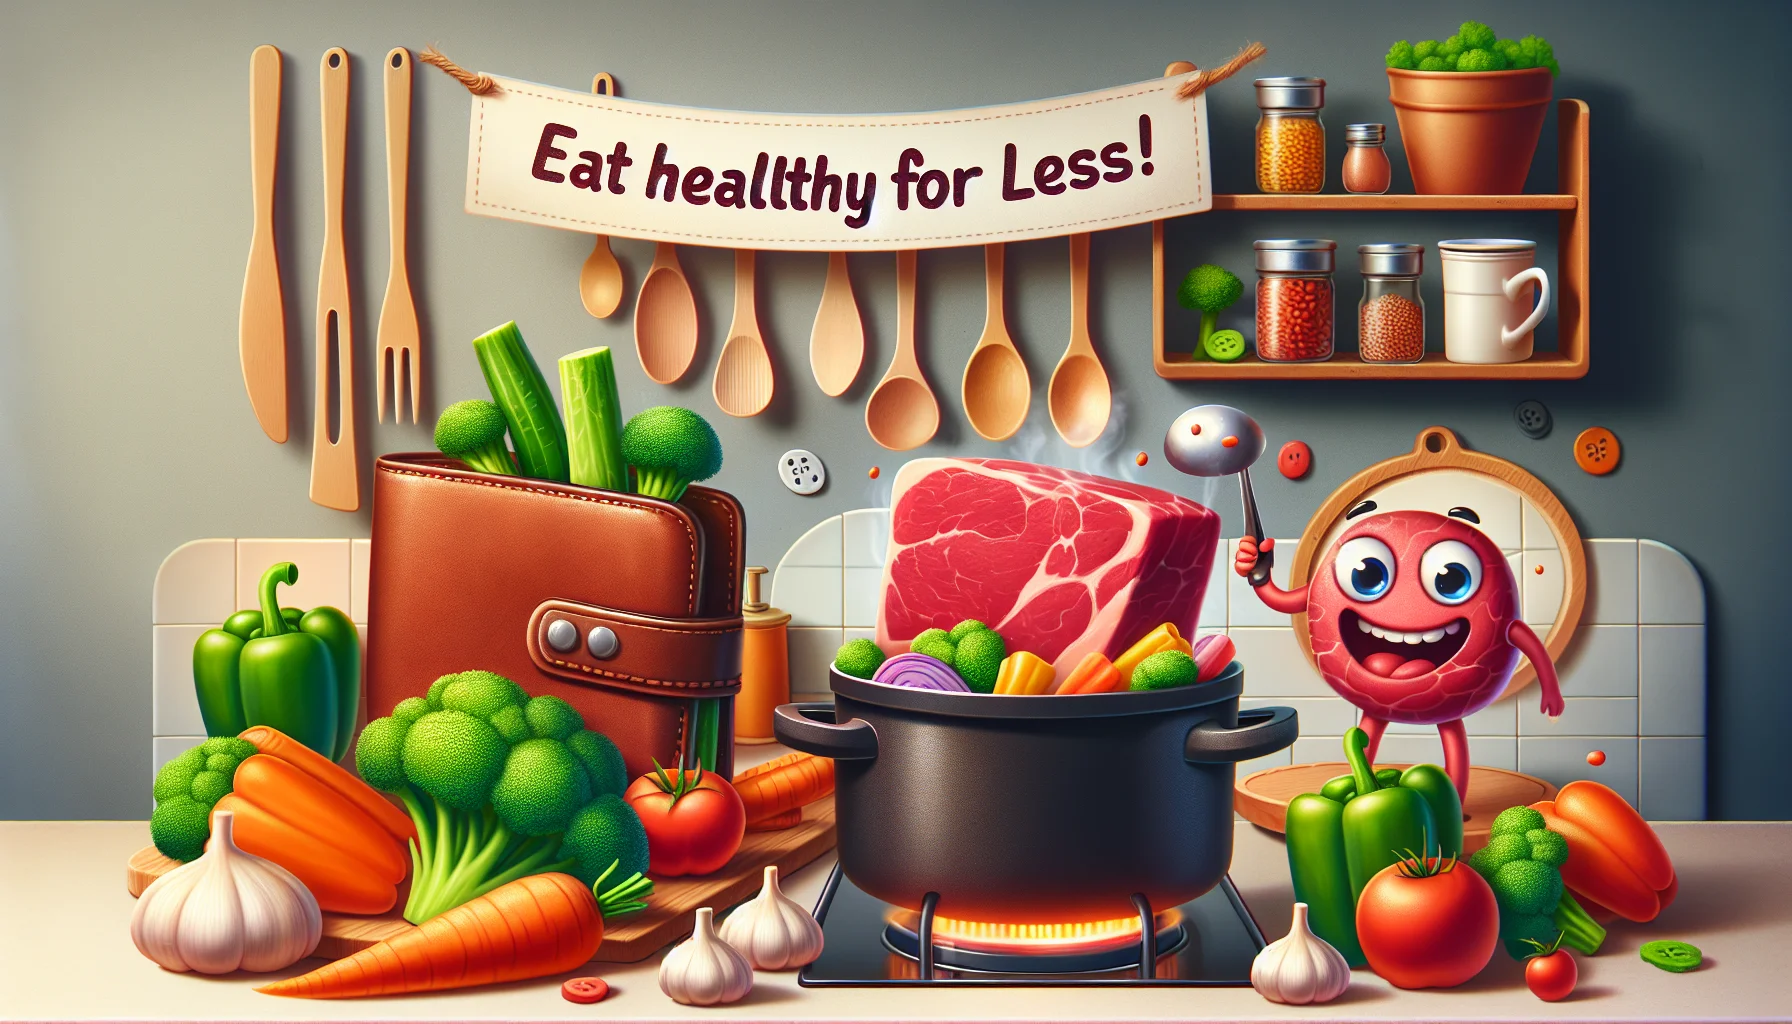 An irresistibly delicious scene: a beef chuck recipe preparation set in a fun and quirky kitchen. The cooking process features a range of vibrant and fresh vegetables, such as broccoli, carrots, and bell peppers, suggesting a healthy yet affordable meal. A whimsically drawn, anthropomorphic wallet is standing next to the cooking pot, cheerfully holding a banner that reads 'Eat Healthy for Less!'. Interestingly, the beef chuck appears animated, happily jumping into the pot. The scene communicates the flavorful yet economical nature of the meal, and encourages the viewers to opt for healthy and budget-friendly food choices.